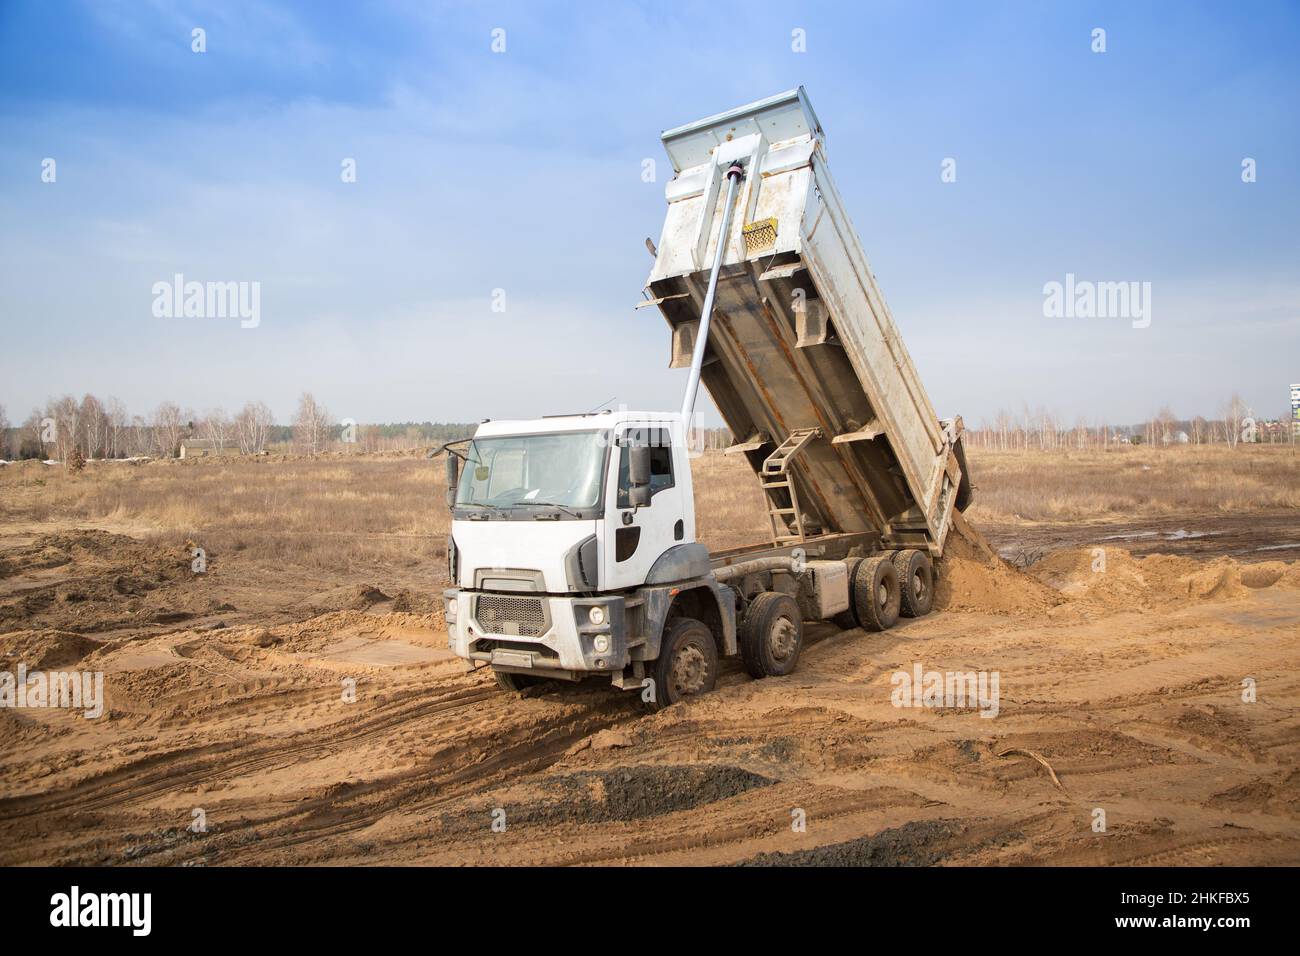 dump truck with a raised body in the process of working on a construction site. transportation and unloading of soil on a construction vehicle. Stock Photo